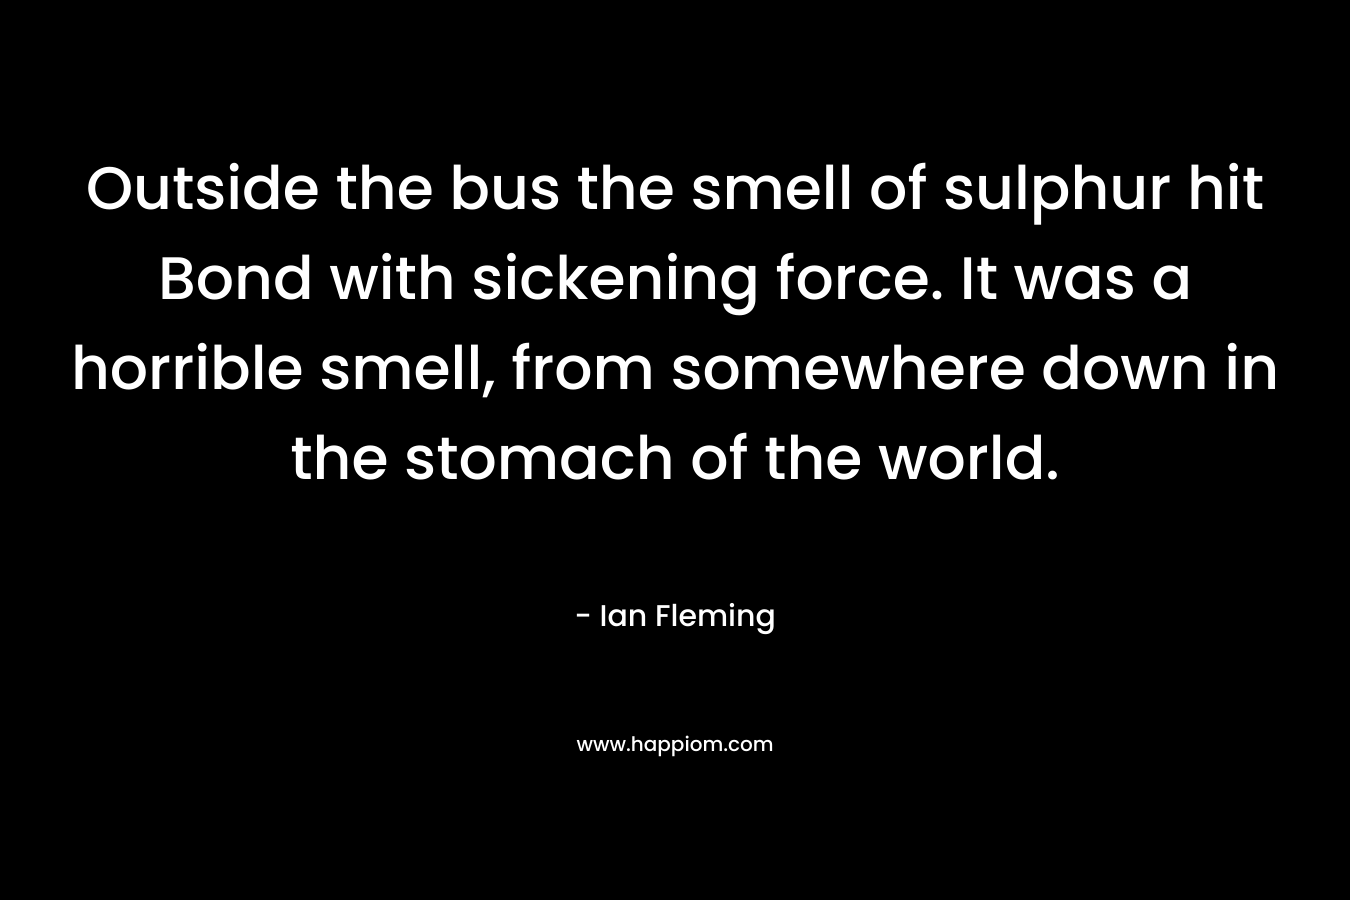 Outside the bus the smell of sulphur hit Bond with sickening force. It was a horrible smell, from somewhere down in the stomach of the world. – Ian Fleming